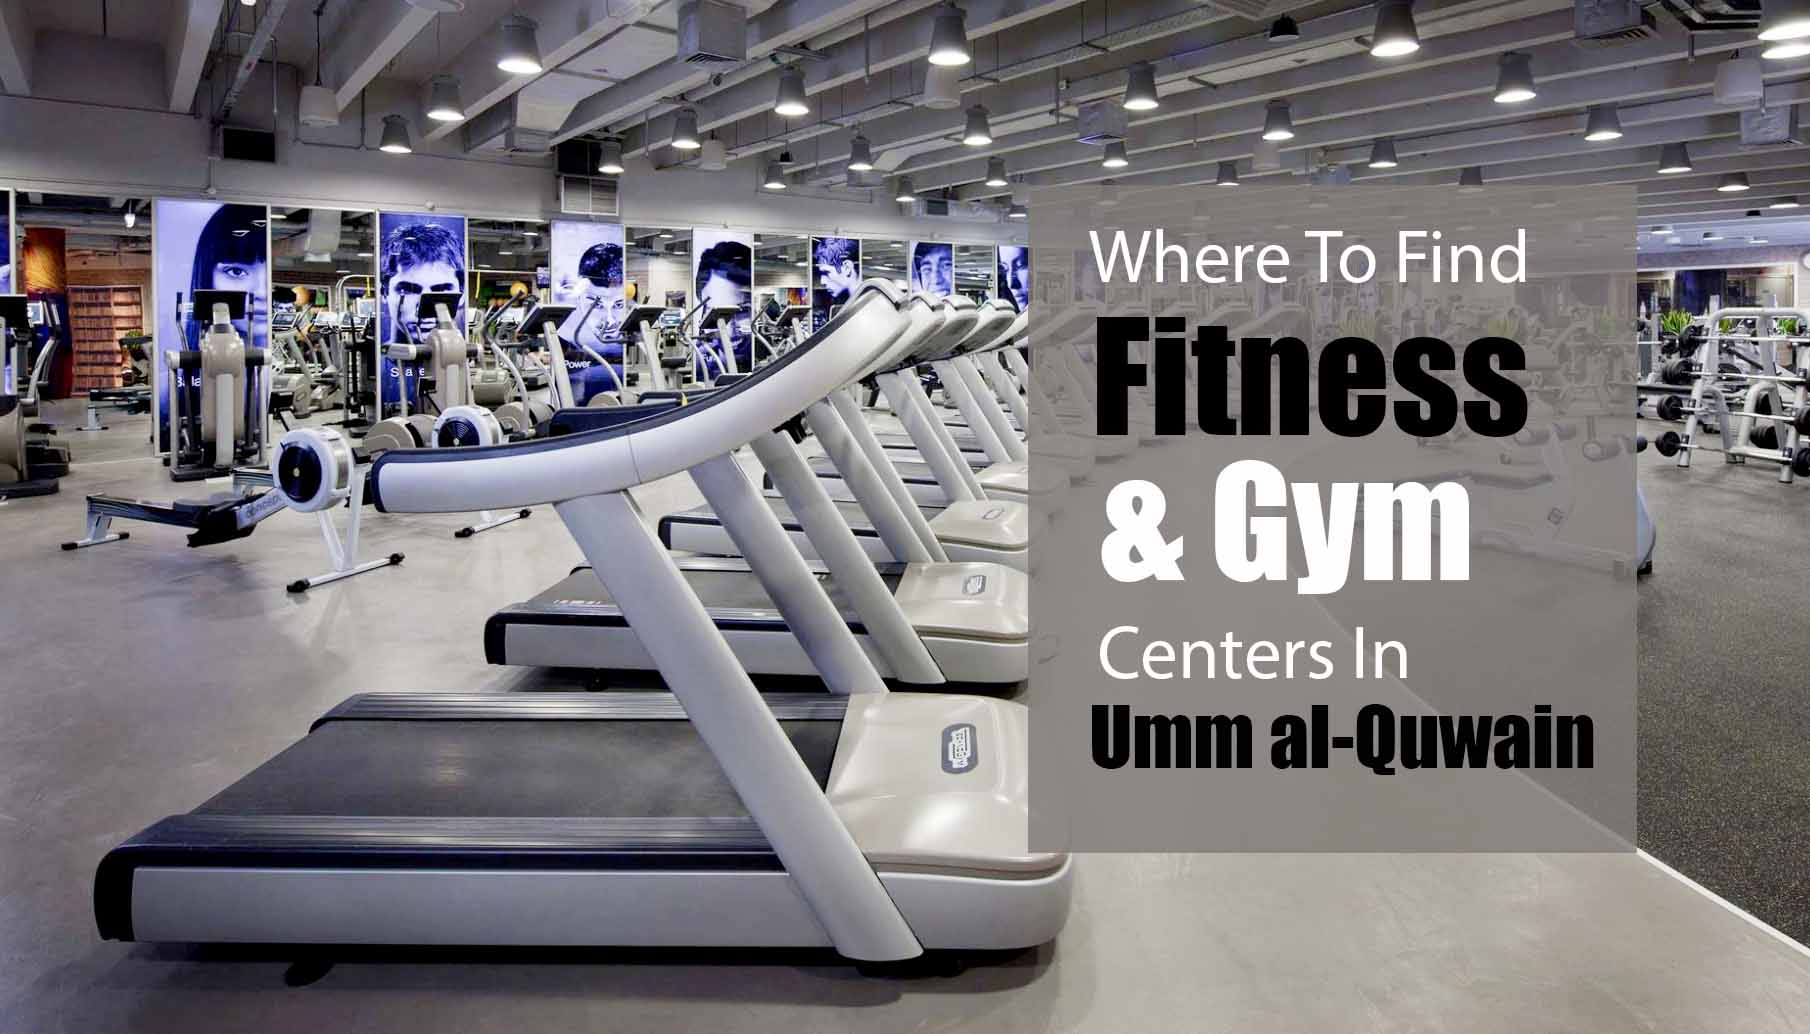 Where to Find Fitness and Gym Centers in Umm al-Quwain